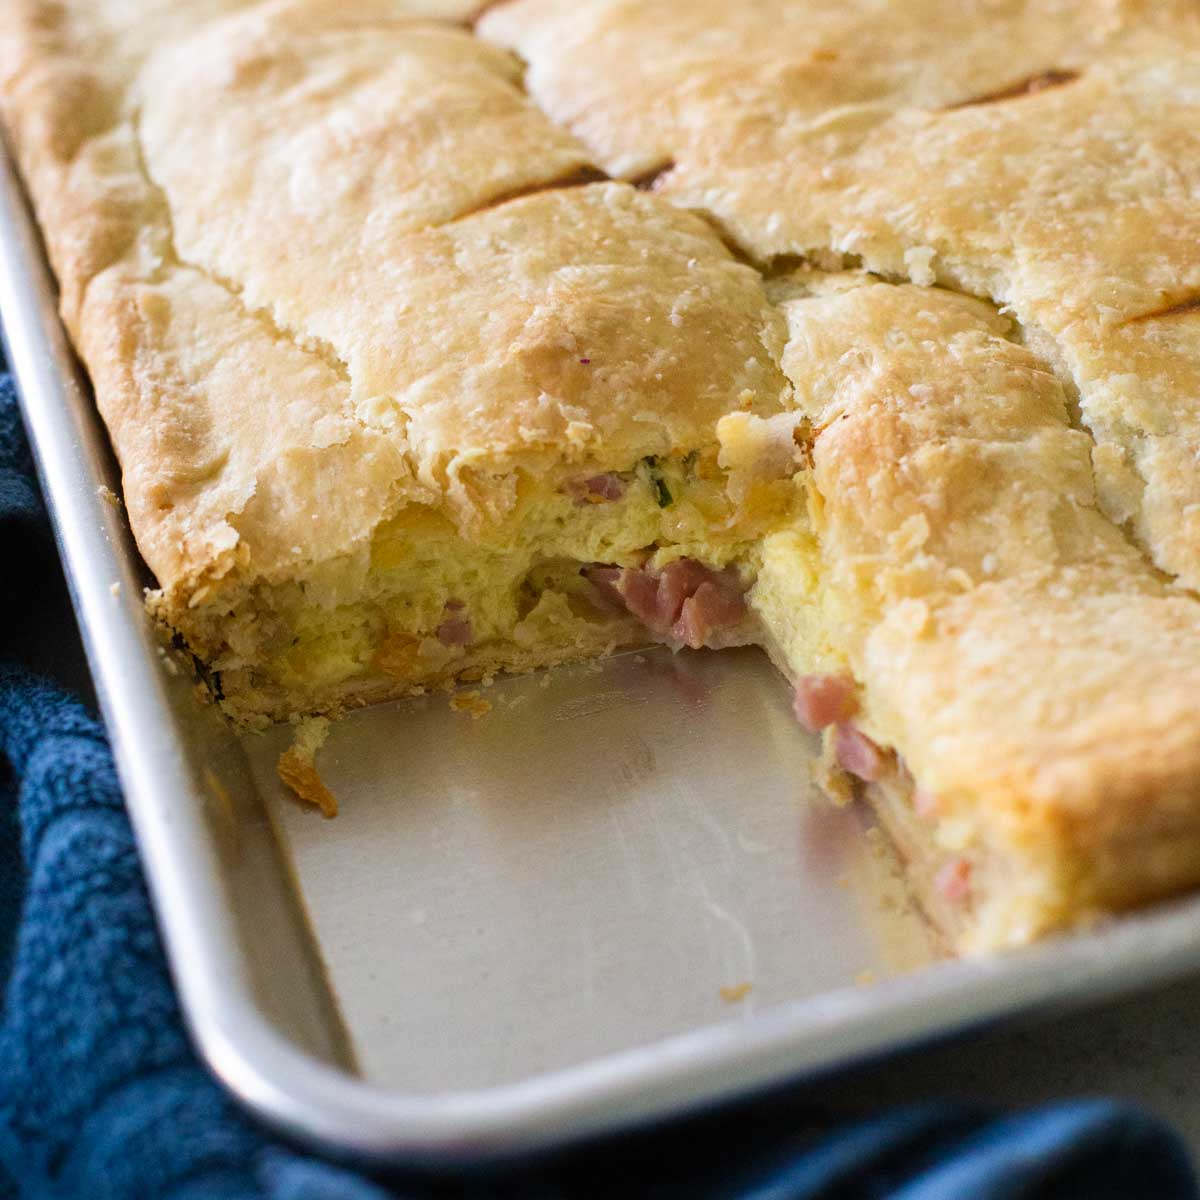 A metal baking pan has an egg and ham breakfast pie with a buttery, flaky pie crust.